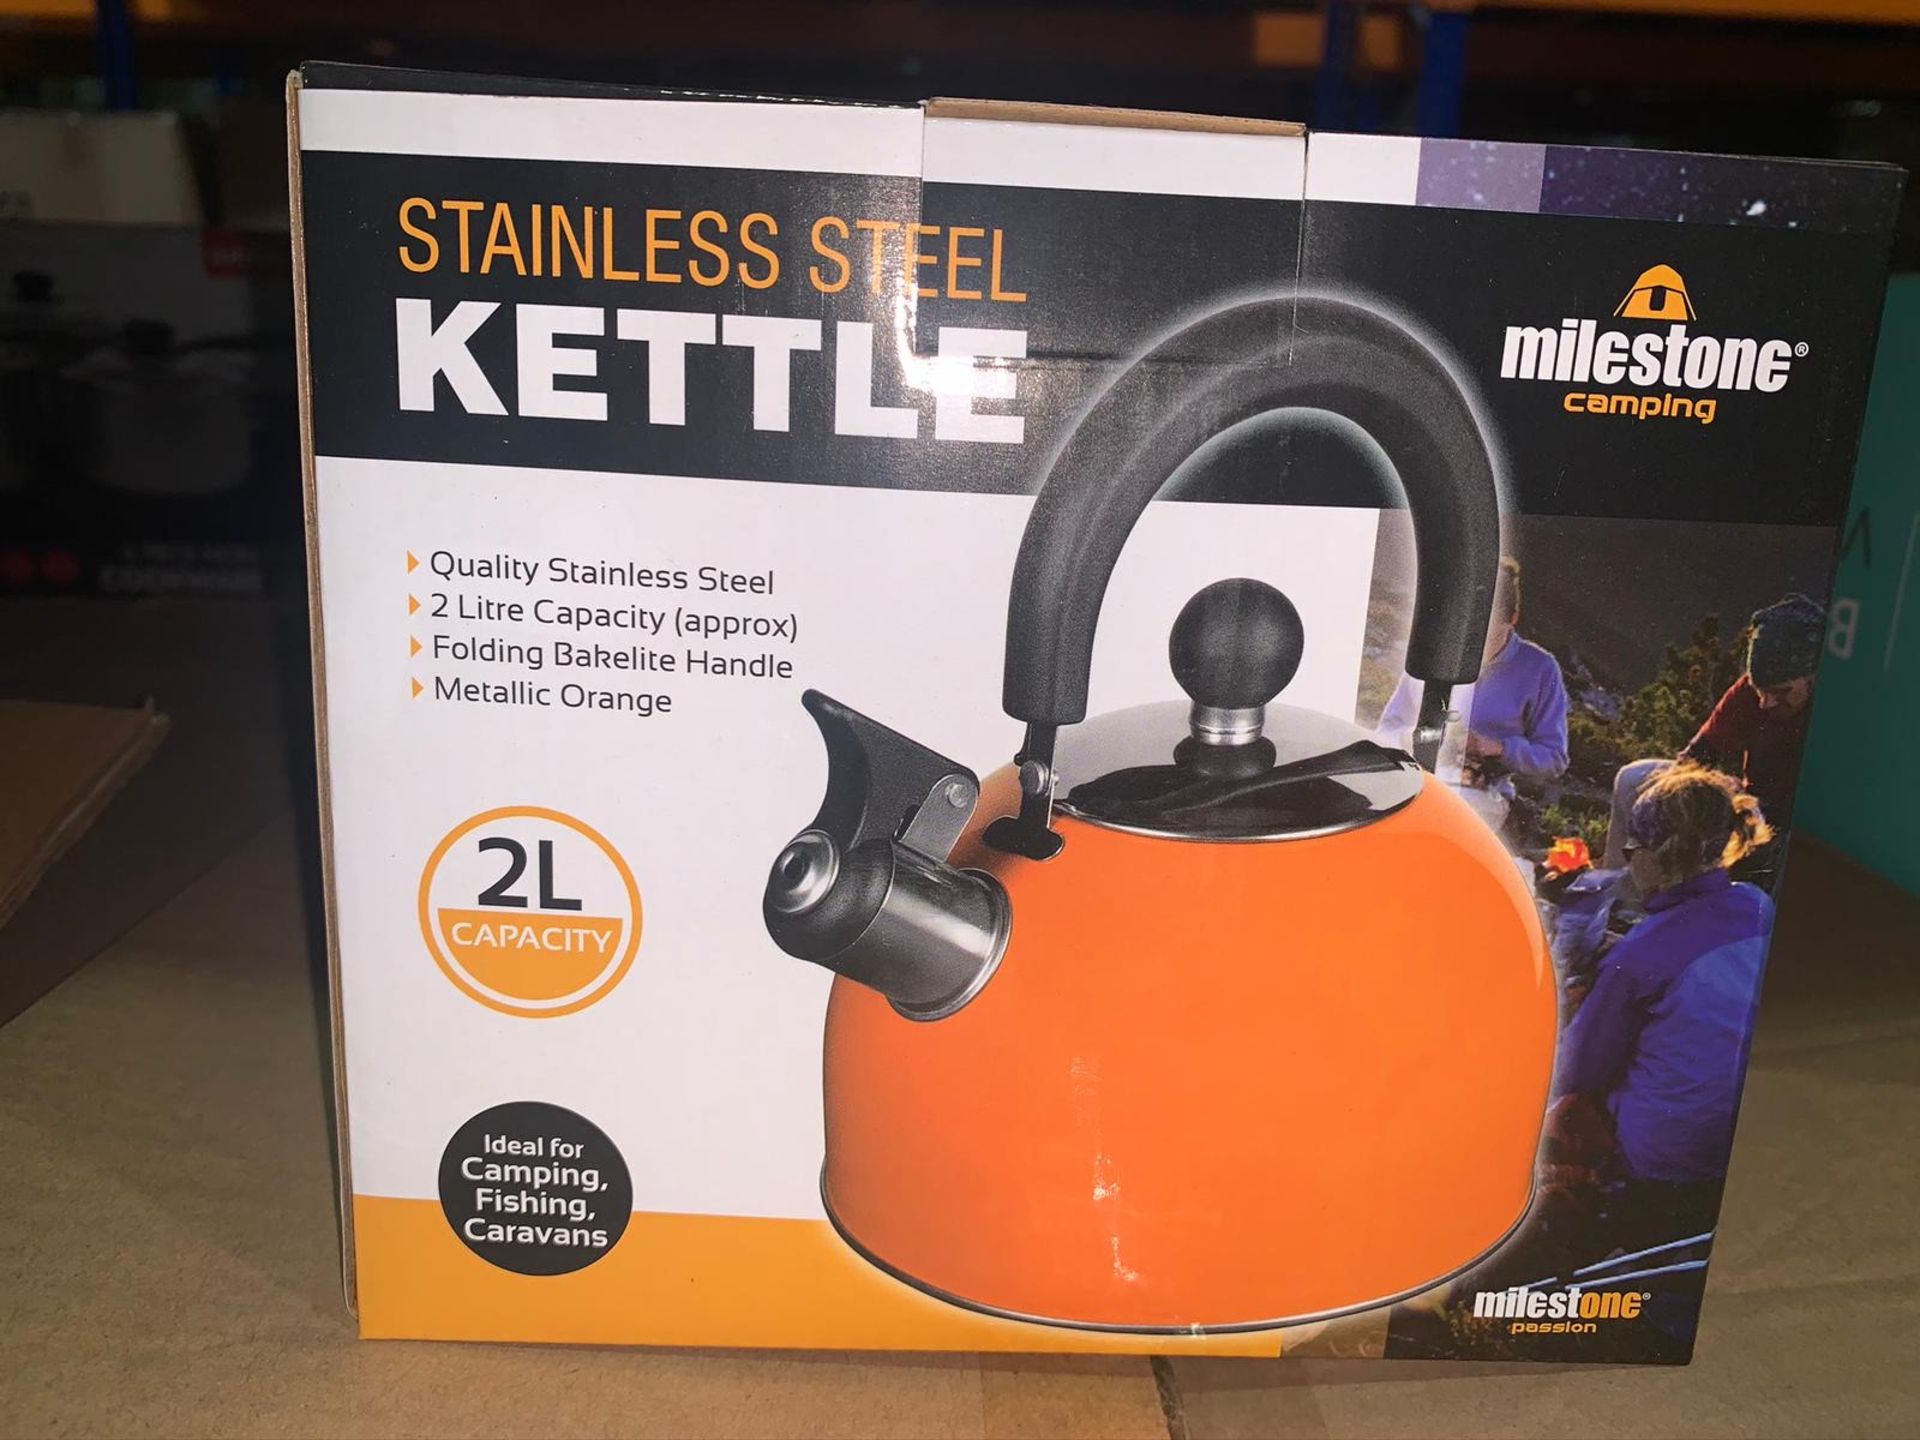 3 x BRAND NEW BOXED MILESTONE CAMPING STAINLESS STEEL KETTLE 2L